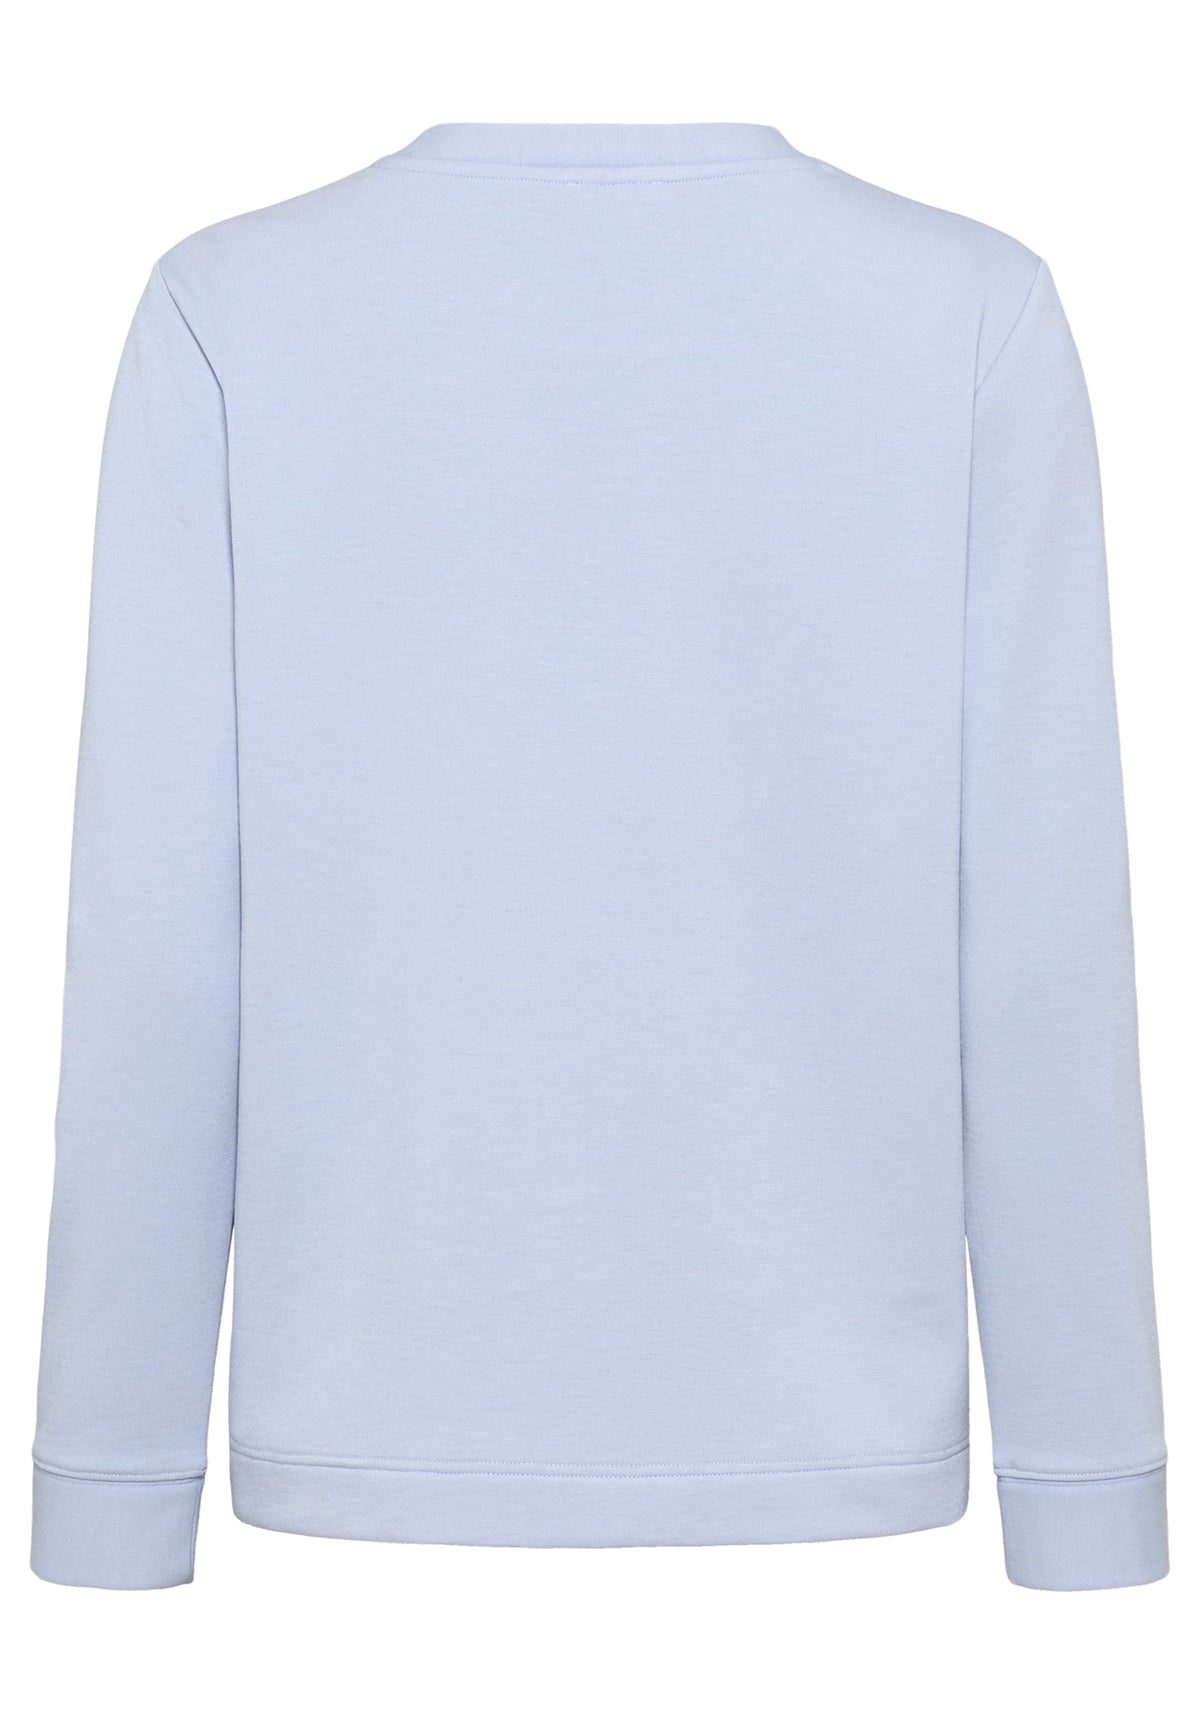 Long Sleeve Crew Neck Jersey Knit Top